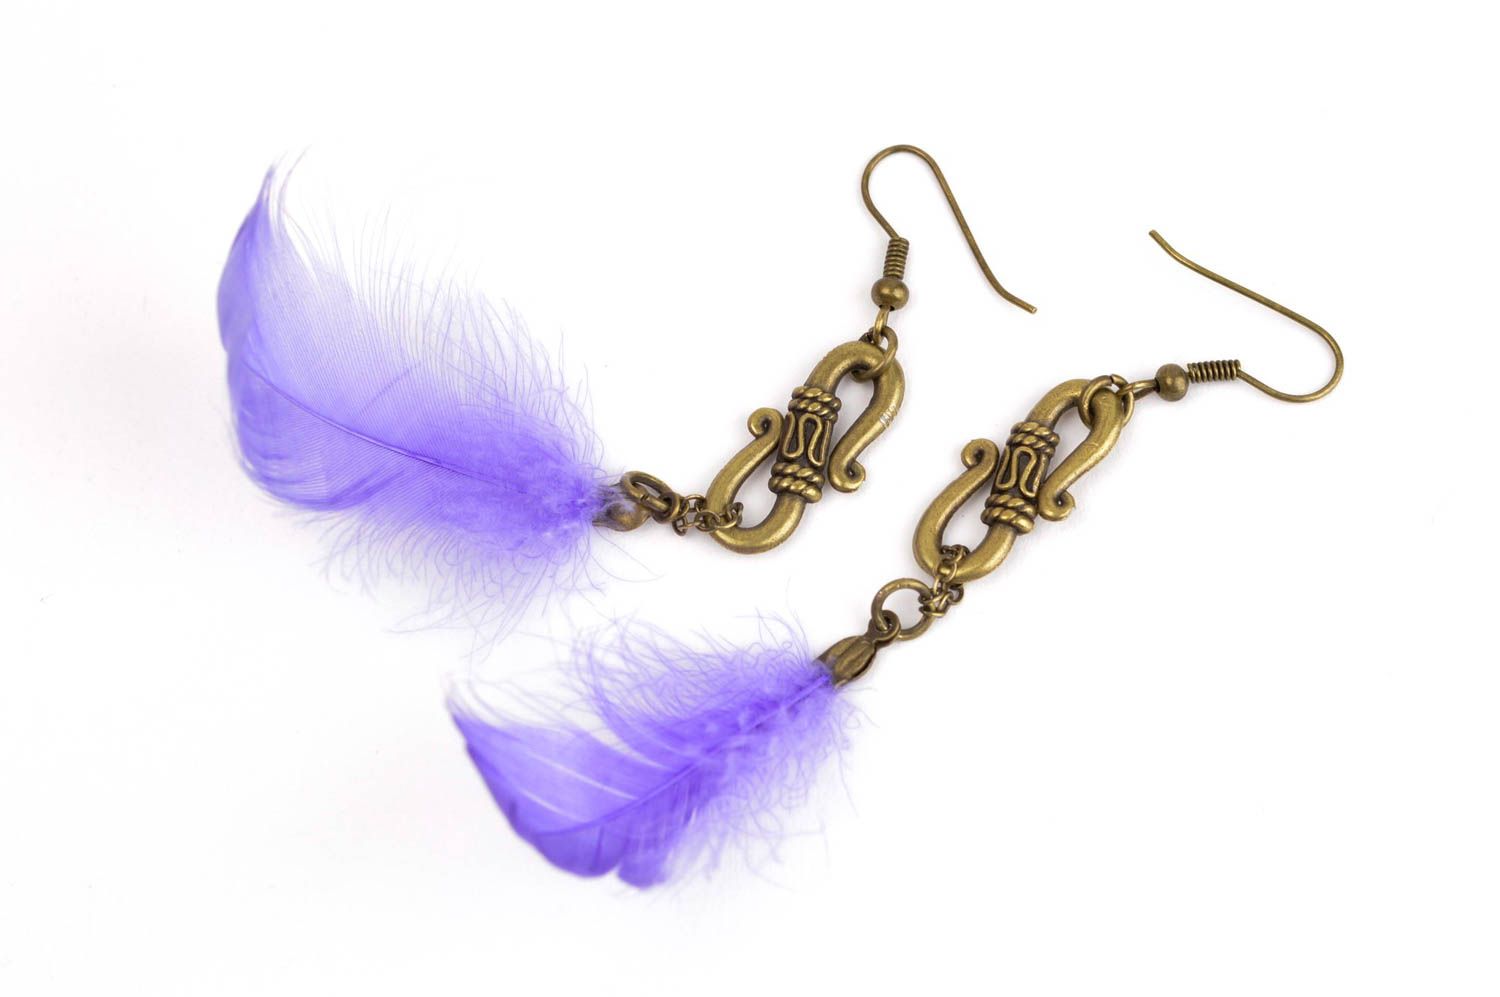 Handmade earrings with charms long feather earrings unusual jewelry gift ideas photo 1